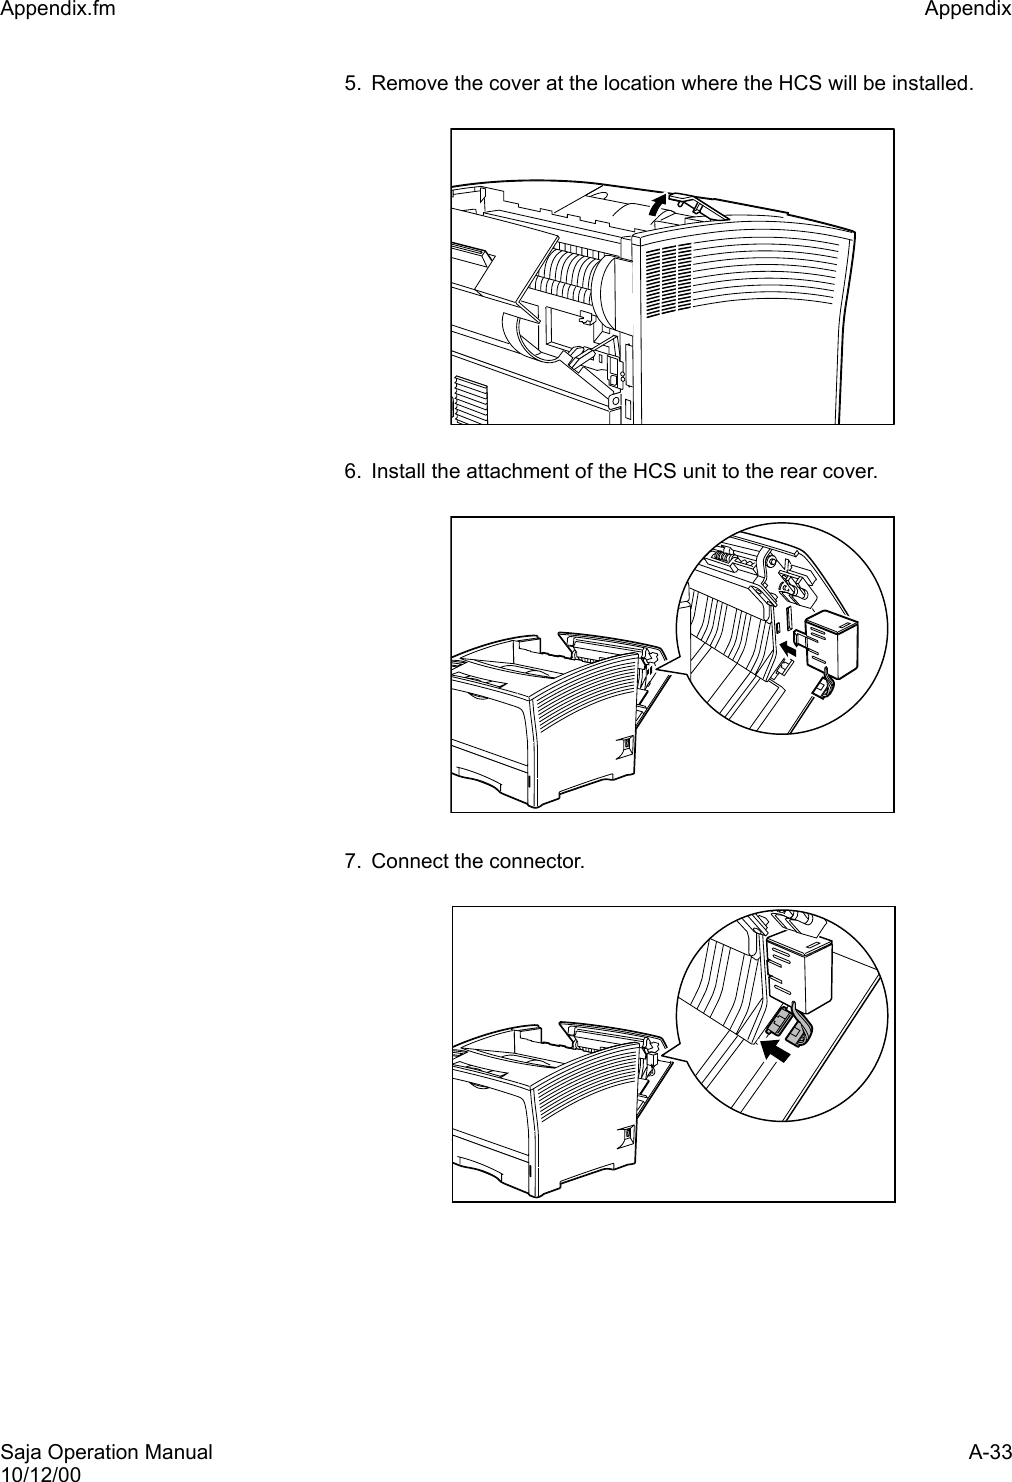 Saja Operation Manual A-3310/12/00Appendix.fm Appendix 5. Remove the cover at the location where the HCS will be installed.6. Install the attachment of the HCS unit to the rear cover.7. Connect the connector.